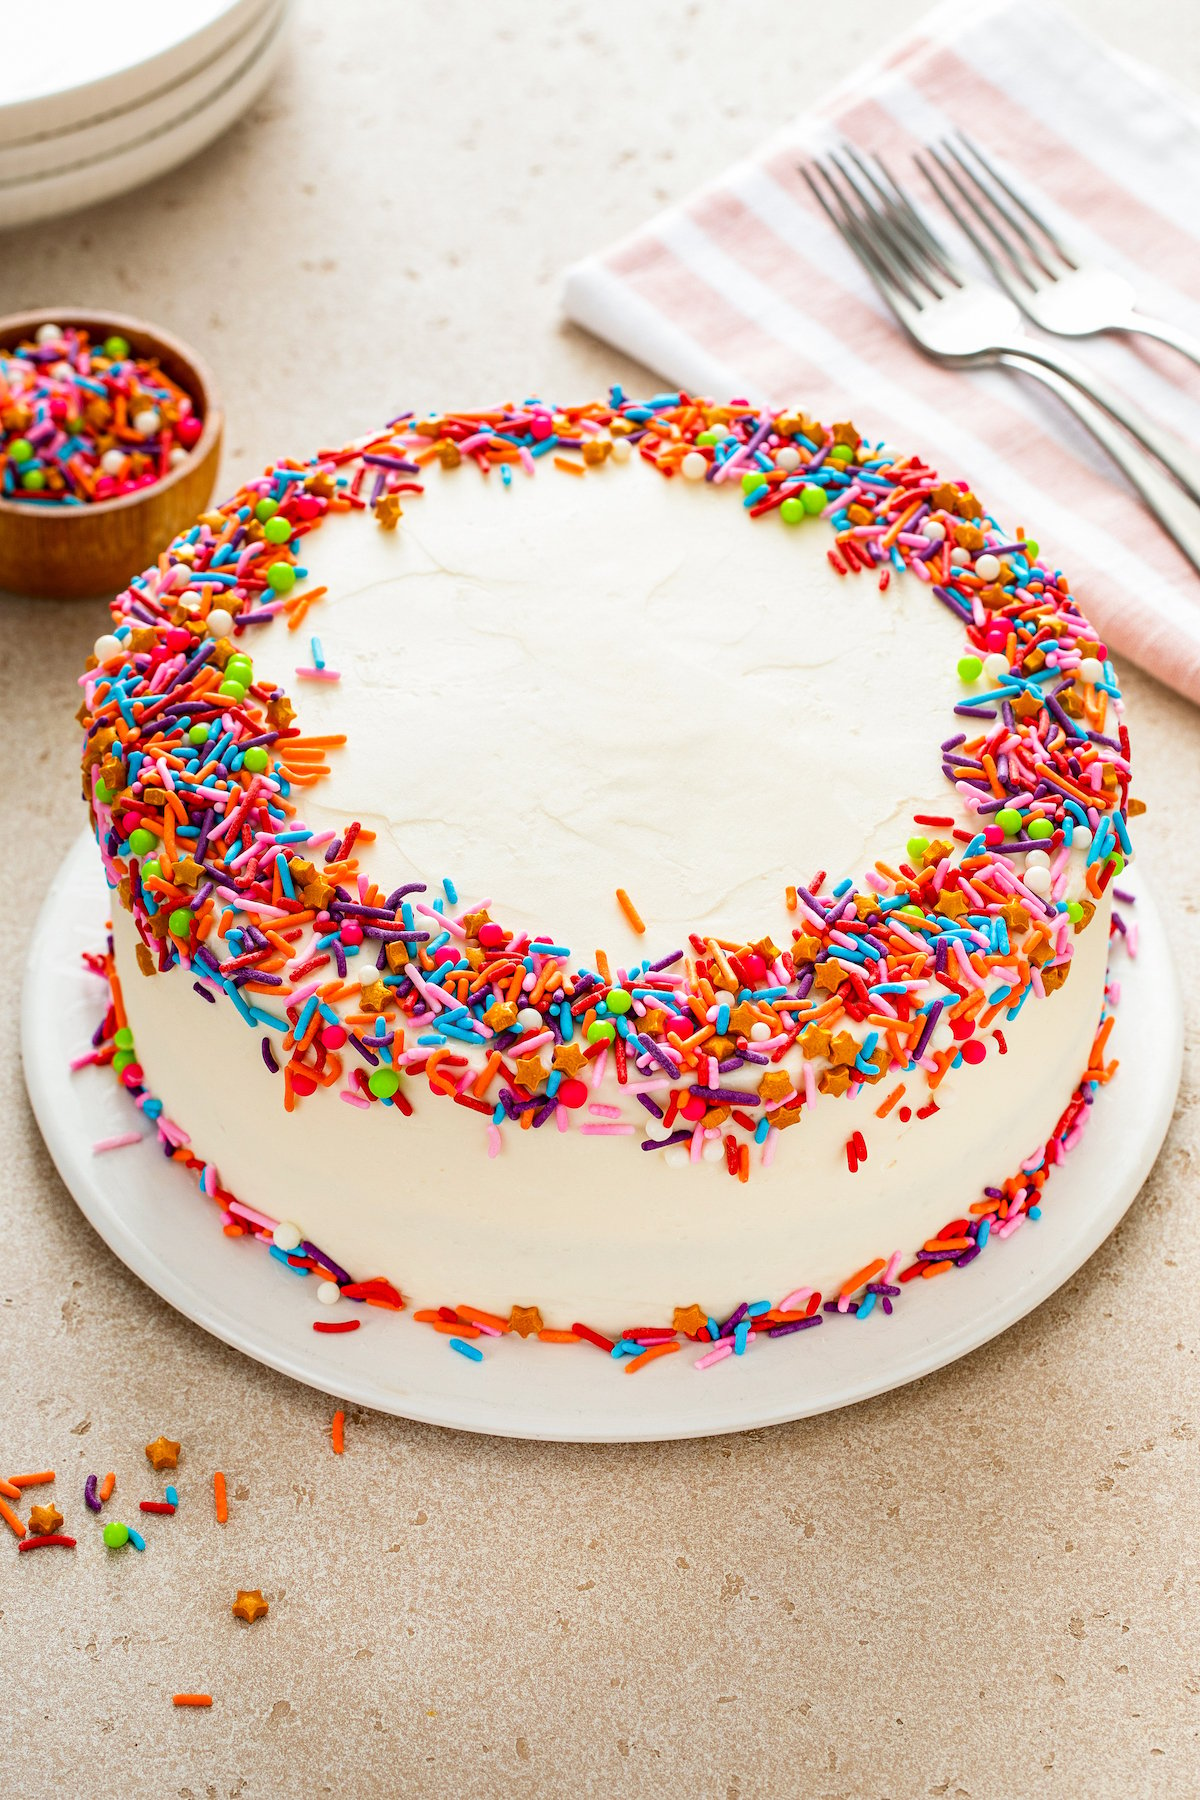 A whole vanilla layer cake frosted and decorated with rainbow sprinkles.